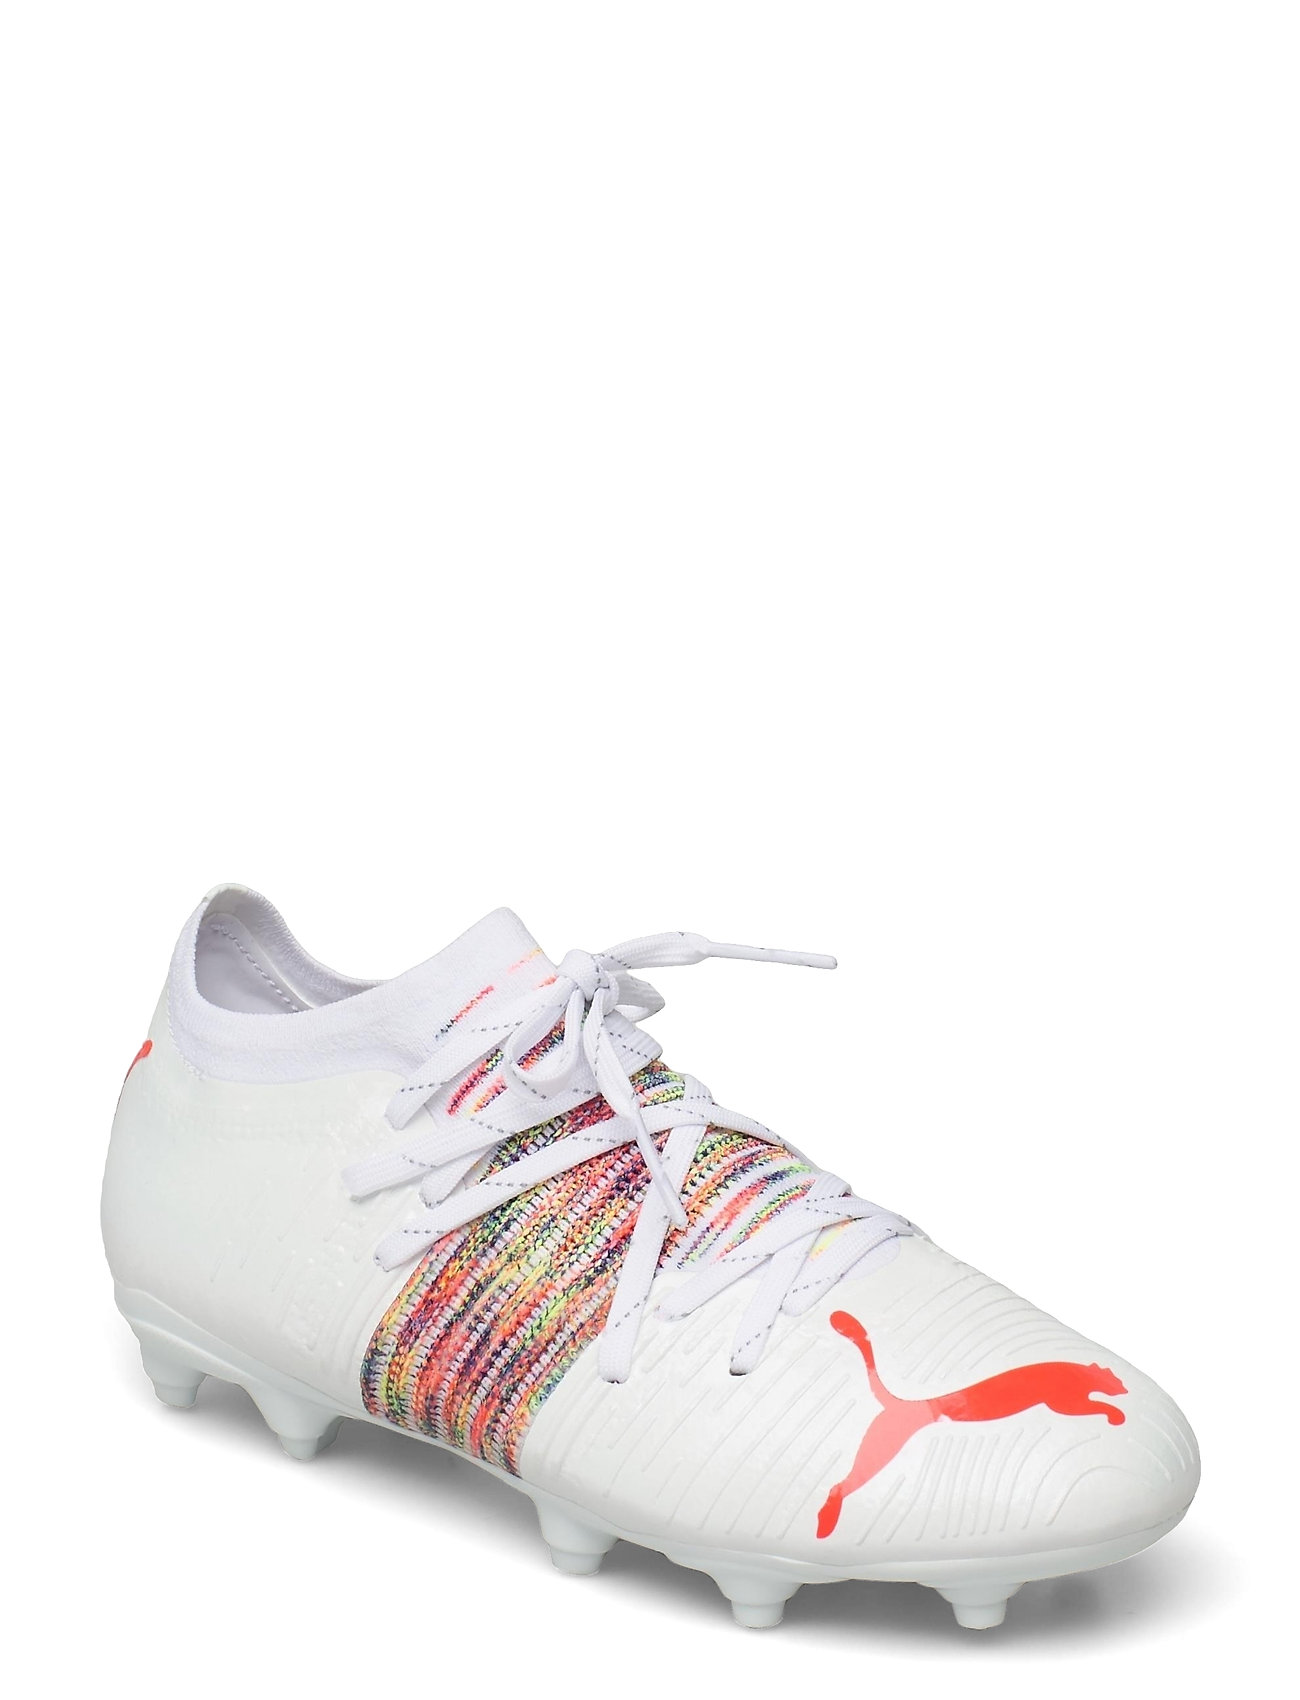 Puma Future Z 2 1 Fg Ag Jr Puma White Red Blast 66 50 Large Selection Of Outlet Styles Booztlet Com